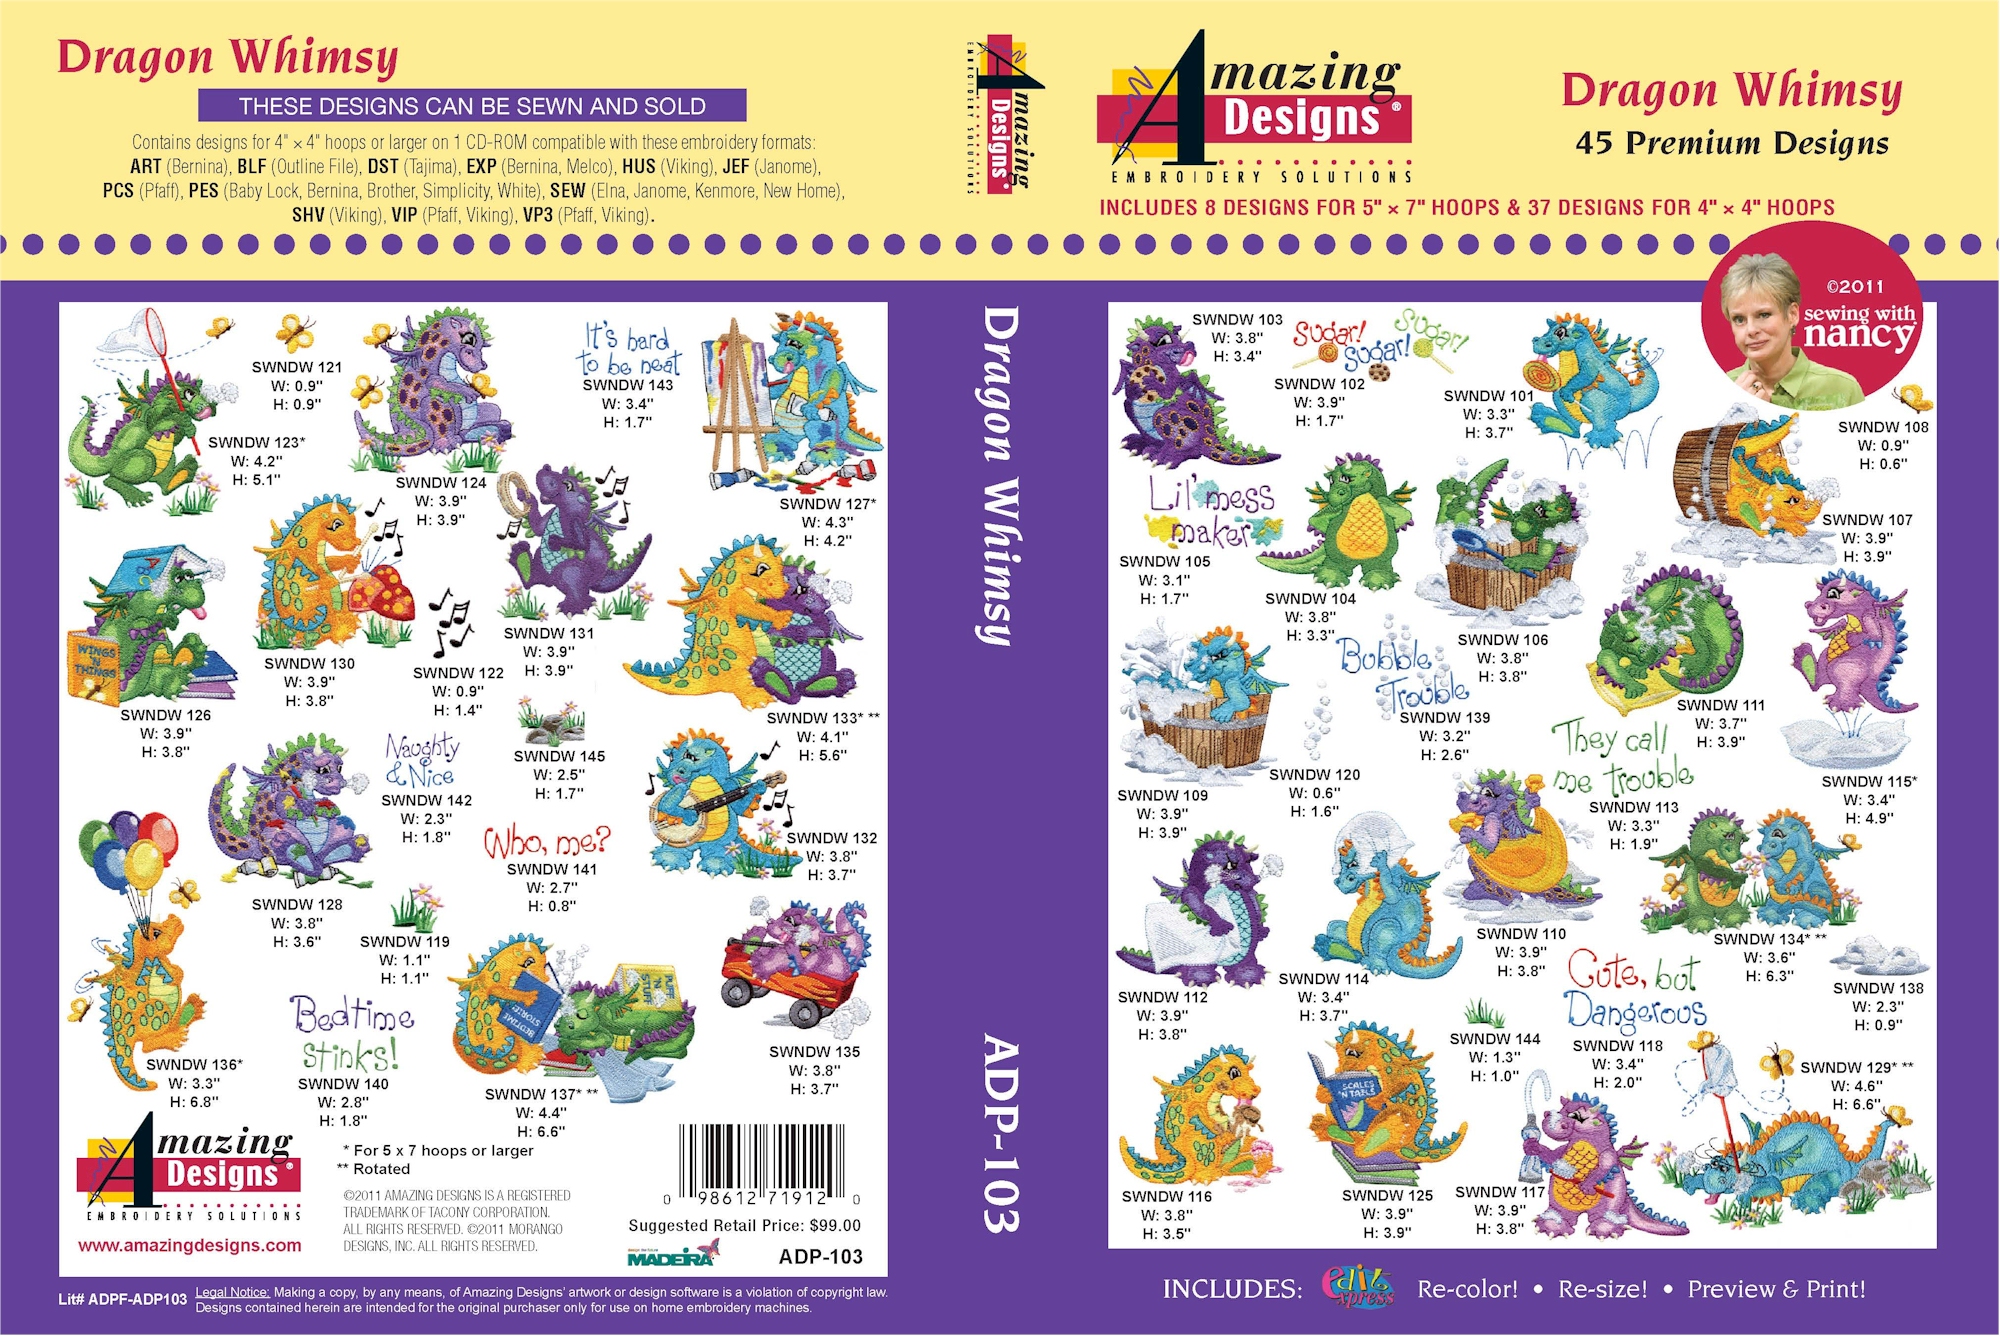 Dragon Whimsy Embroidery Designs by Sewing With Nancy for Amazing Designs on a Multi-Format CD-ROM ADP-103